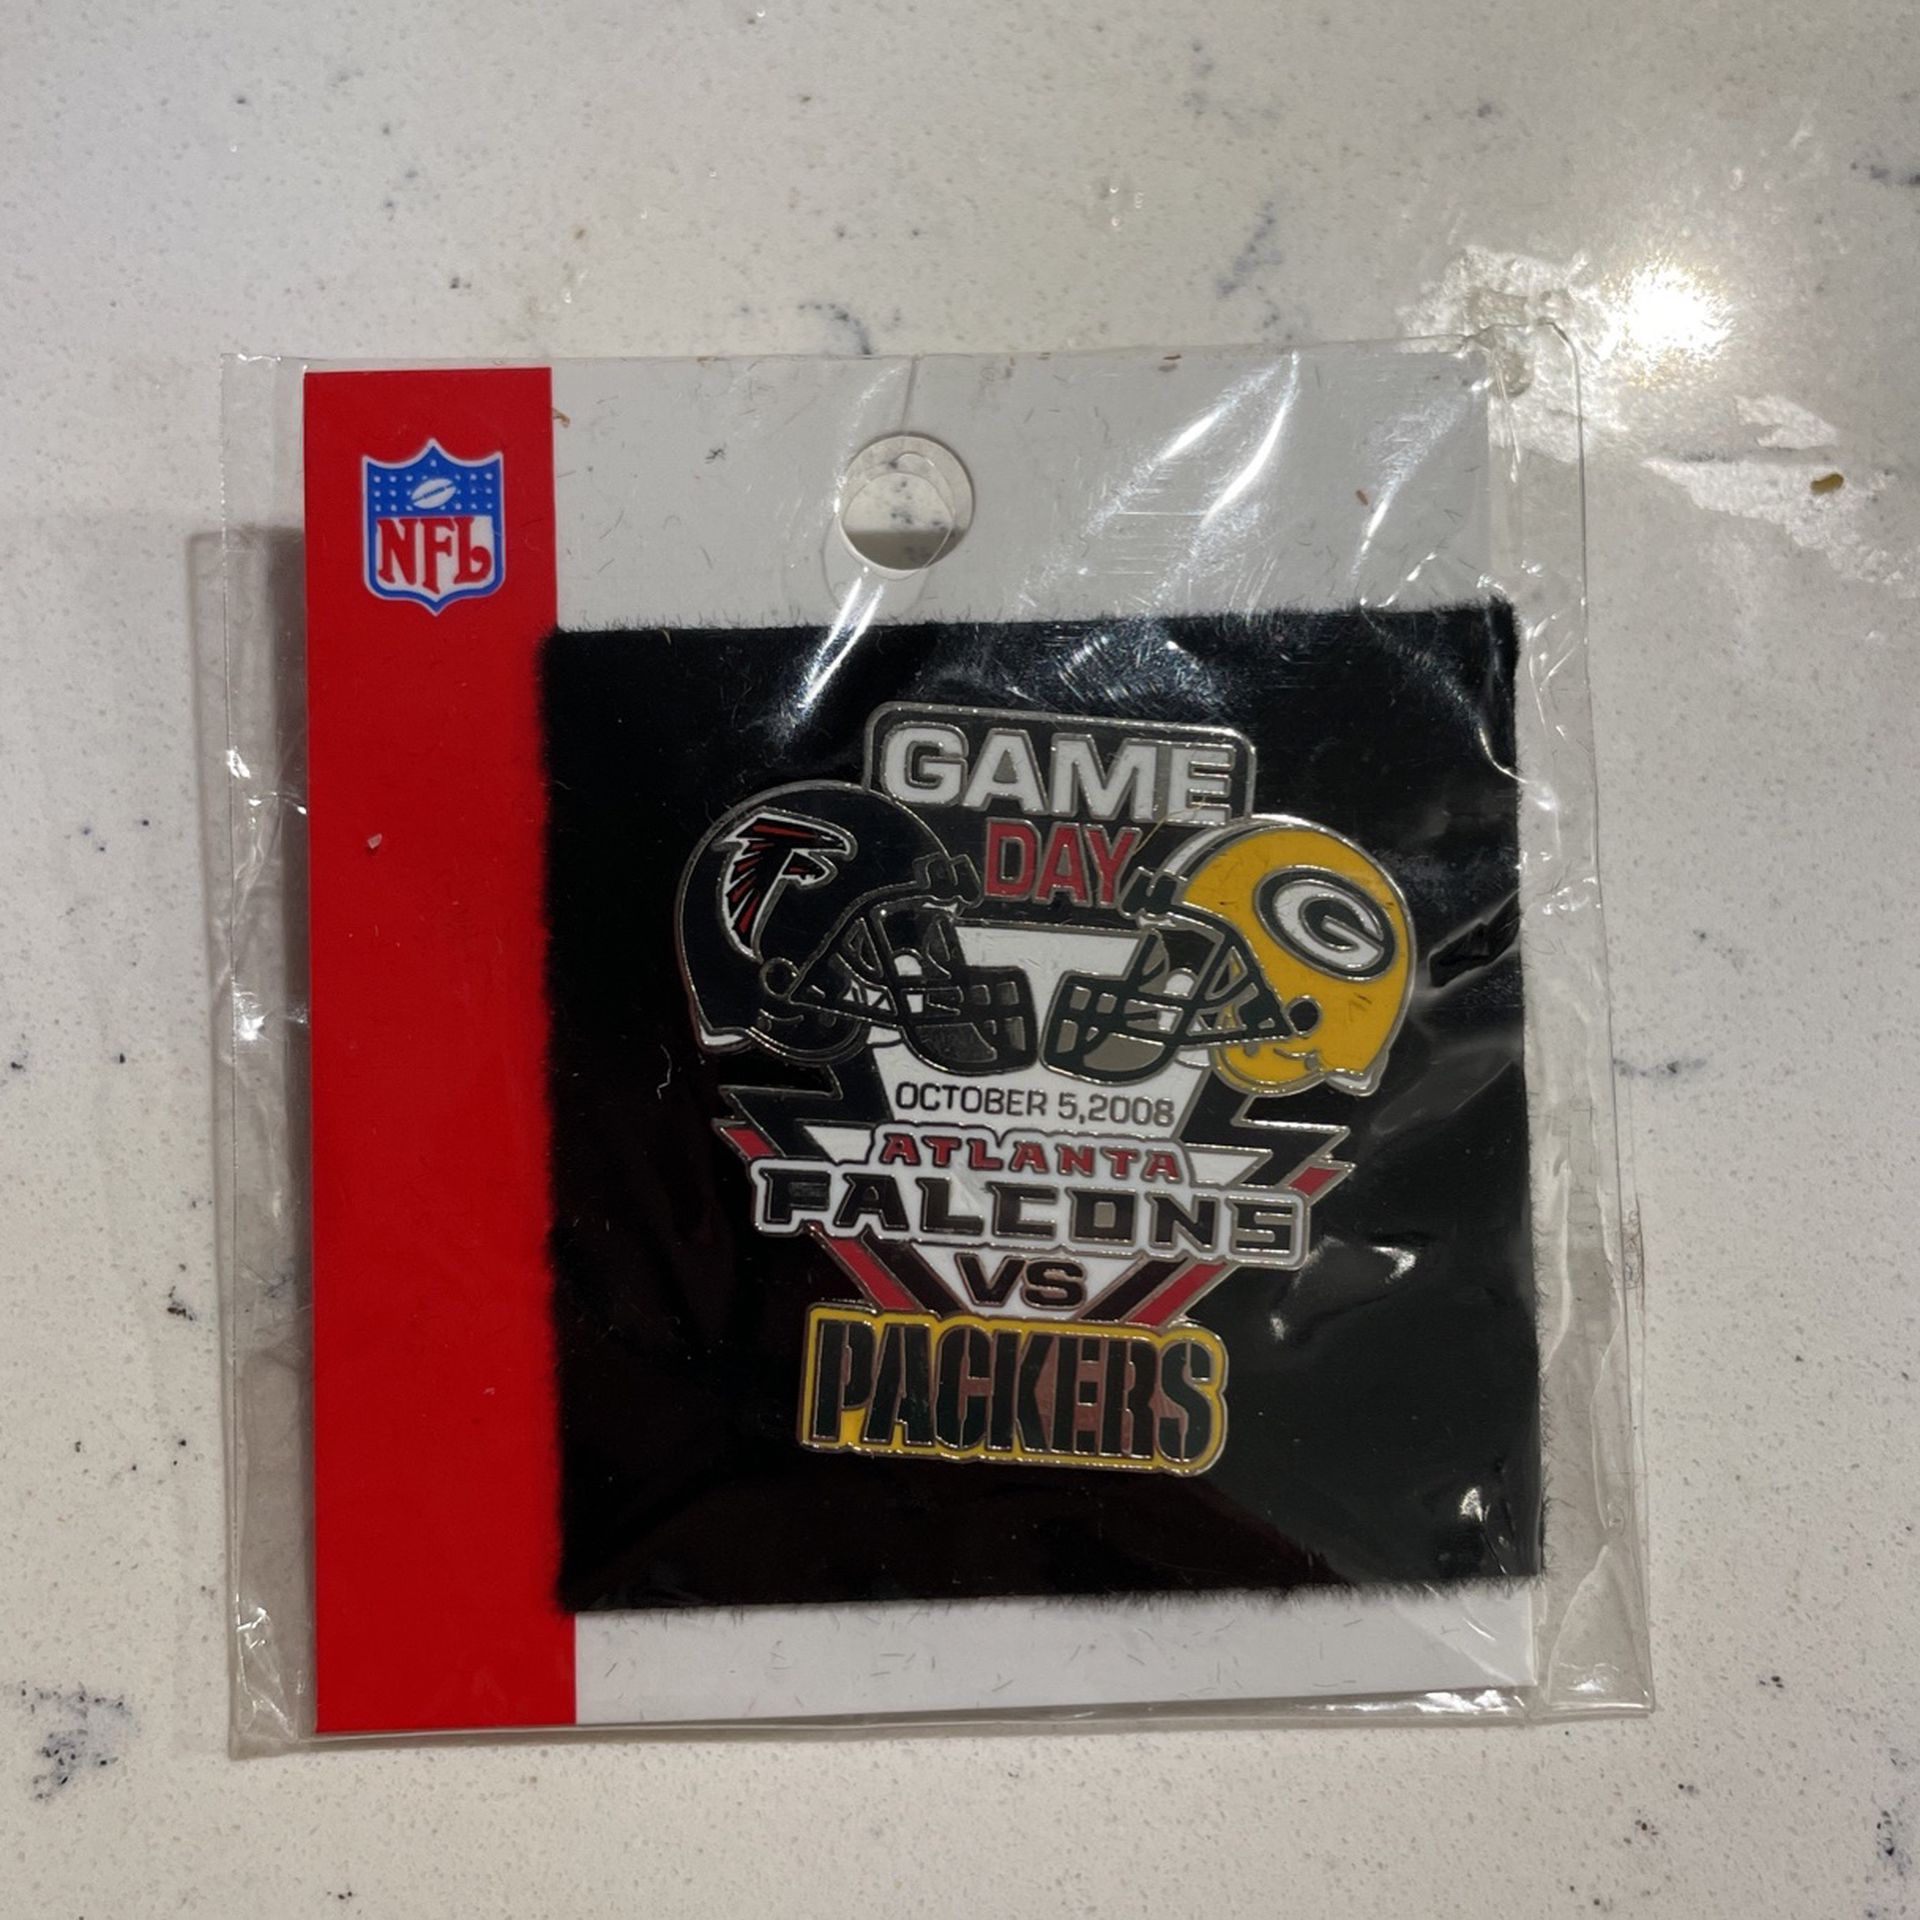 NFL Game Day Pin Falcons Packers